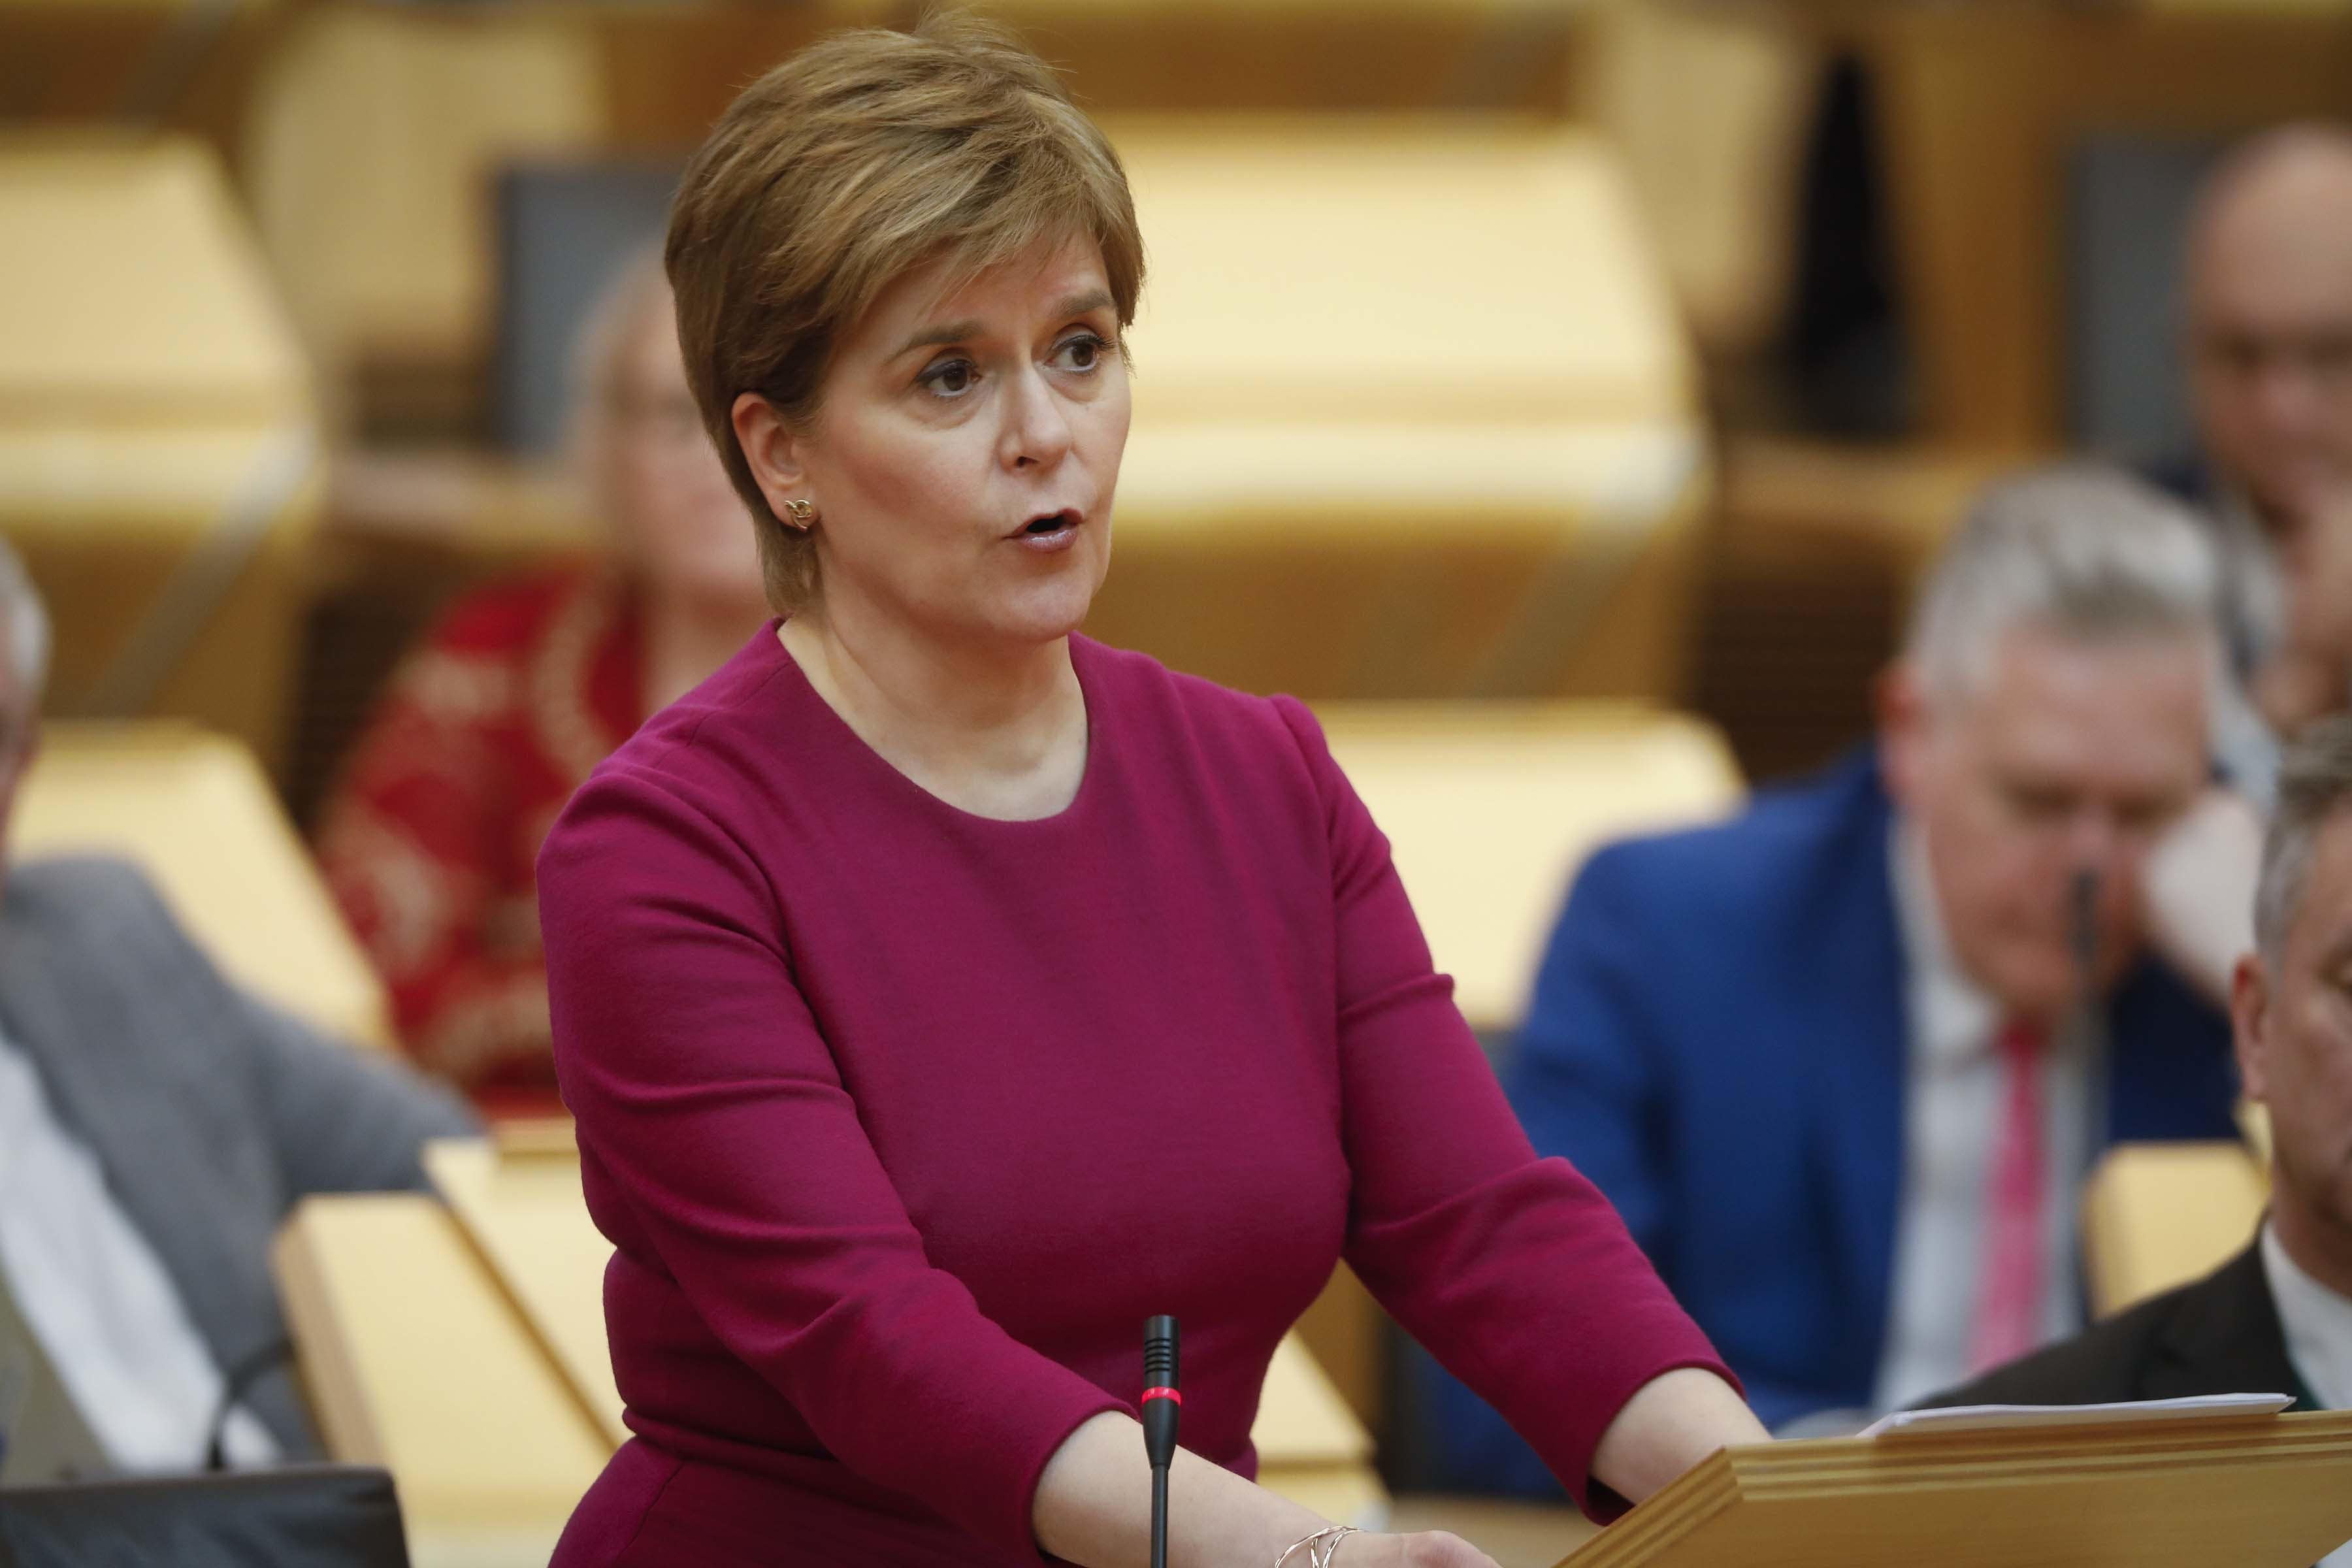 The First Minister said she may write a book on her experiences (Andew Cowan/PA)